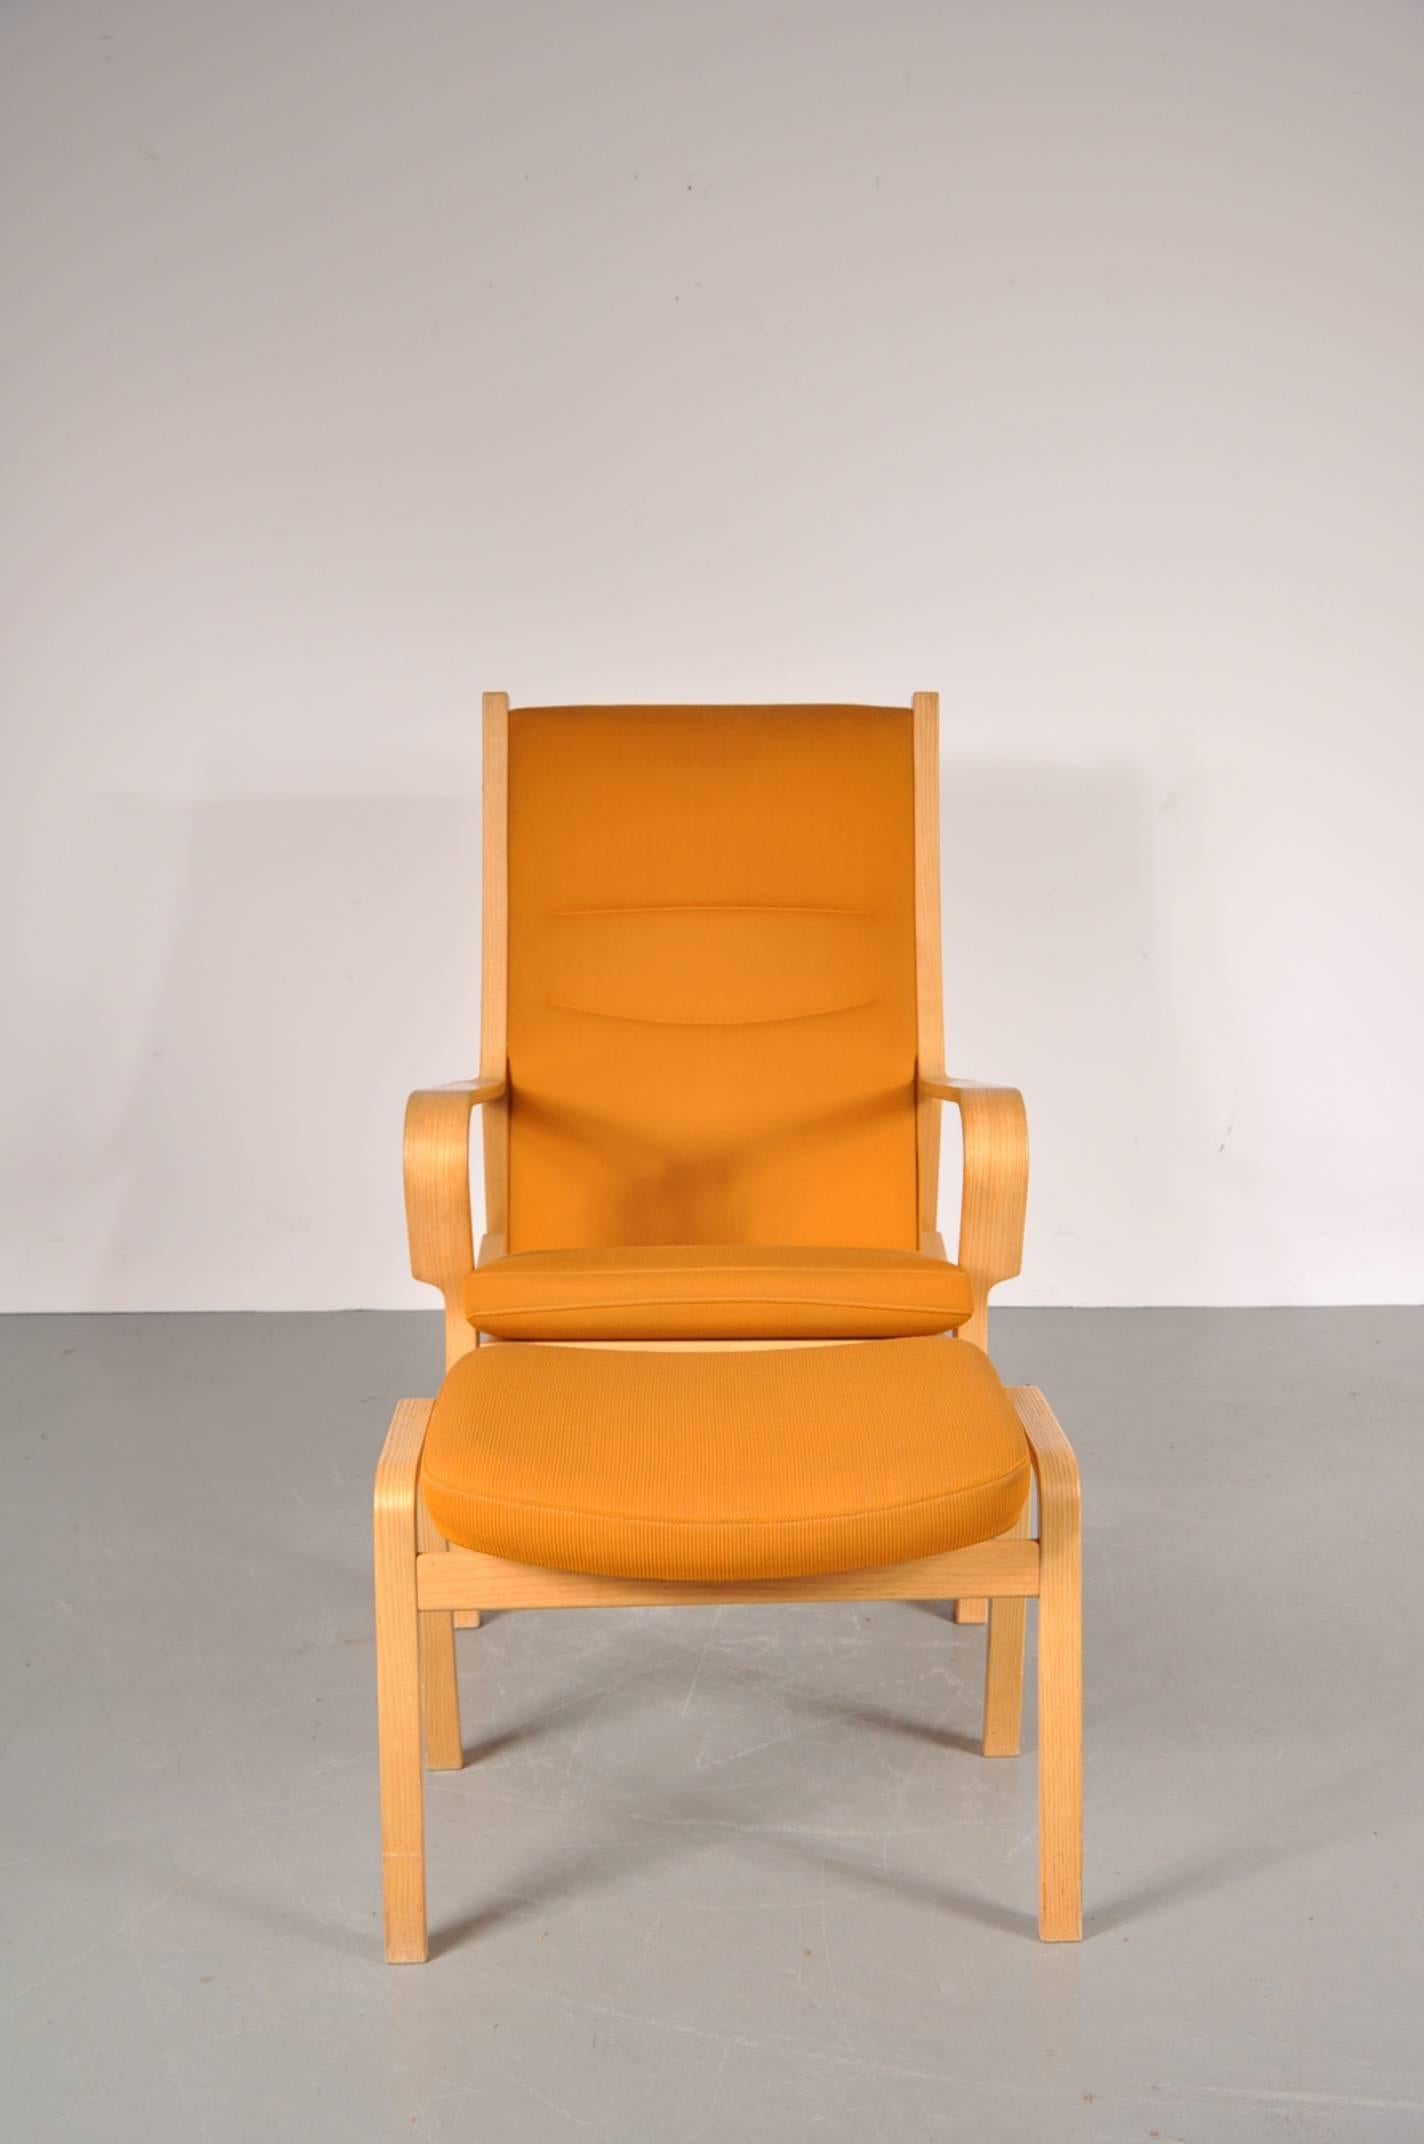 Stunning highback easy chair with matching ottoman, manufactured by Johannes Hansen in Denmark around 1980.

The set has a high quality ash with teak wooden base and original orange fabric upholstery.

In good original condition with minor wear